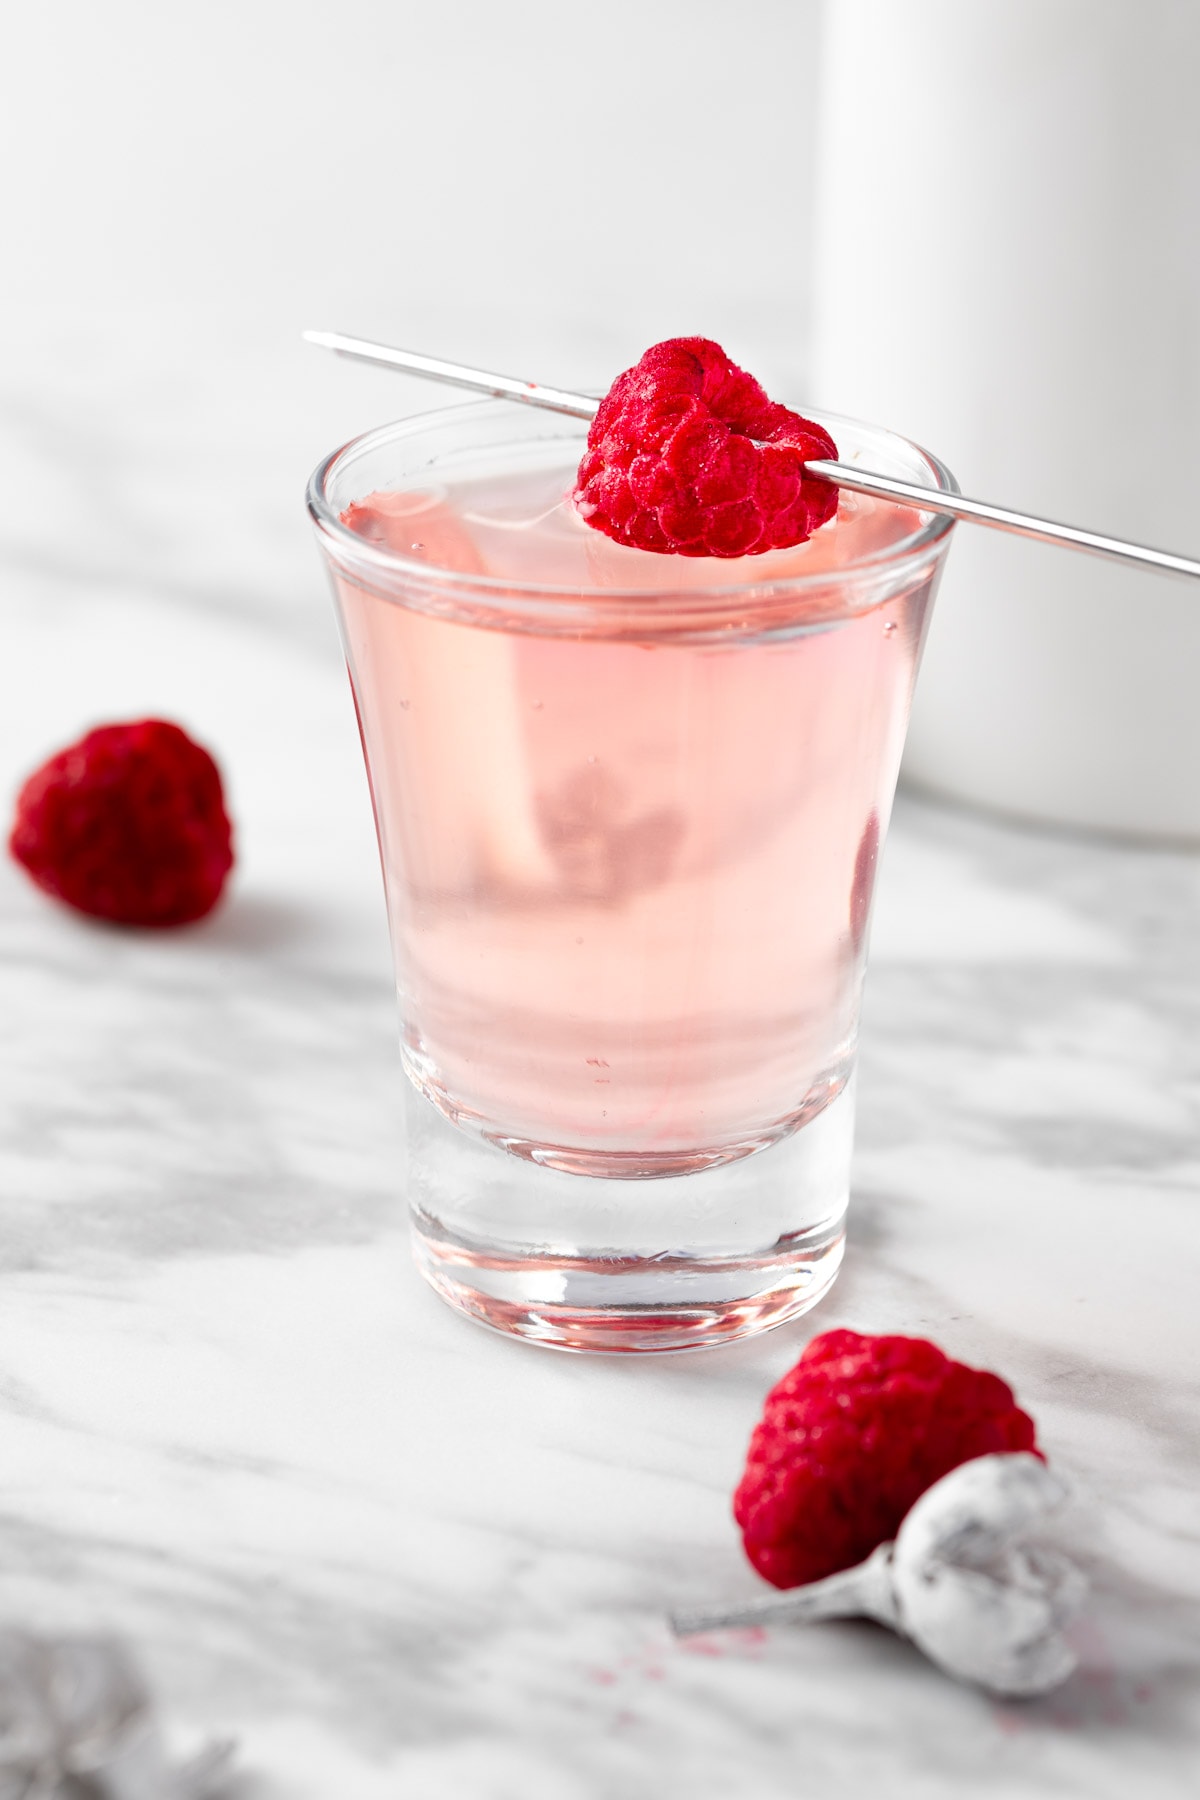 A Raspberry Lemon Drop Shot garnished with a fresh raspberry, on a white table.